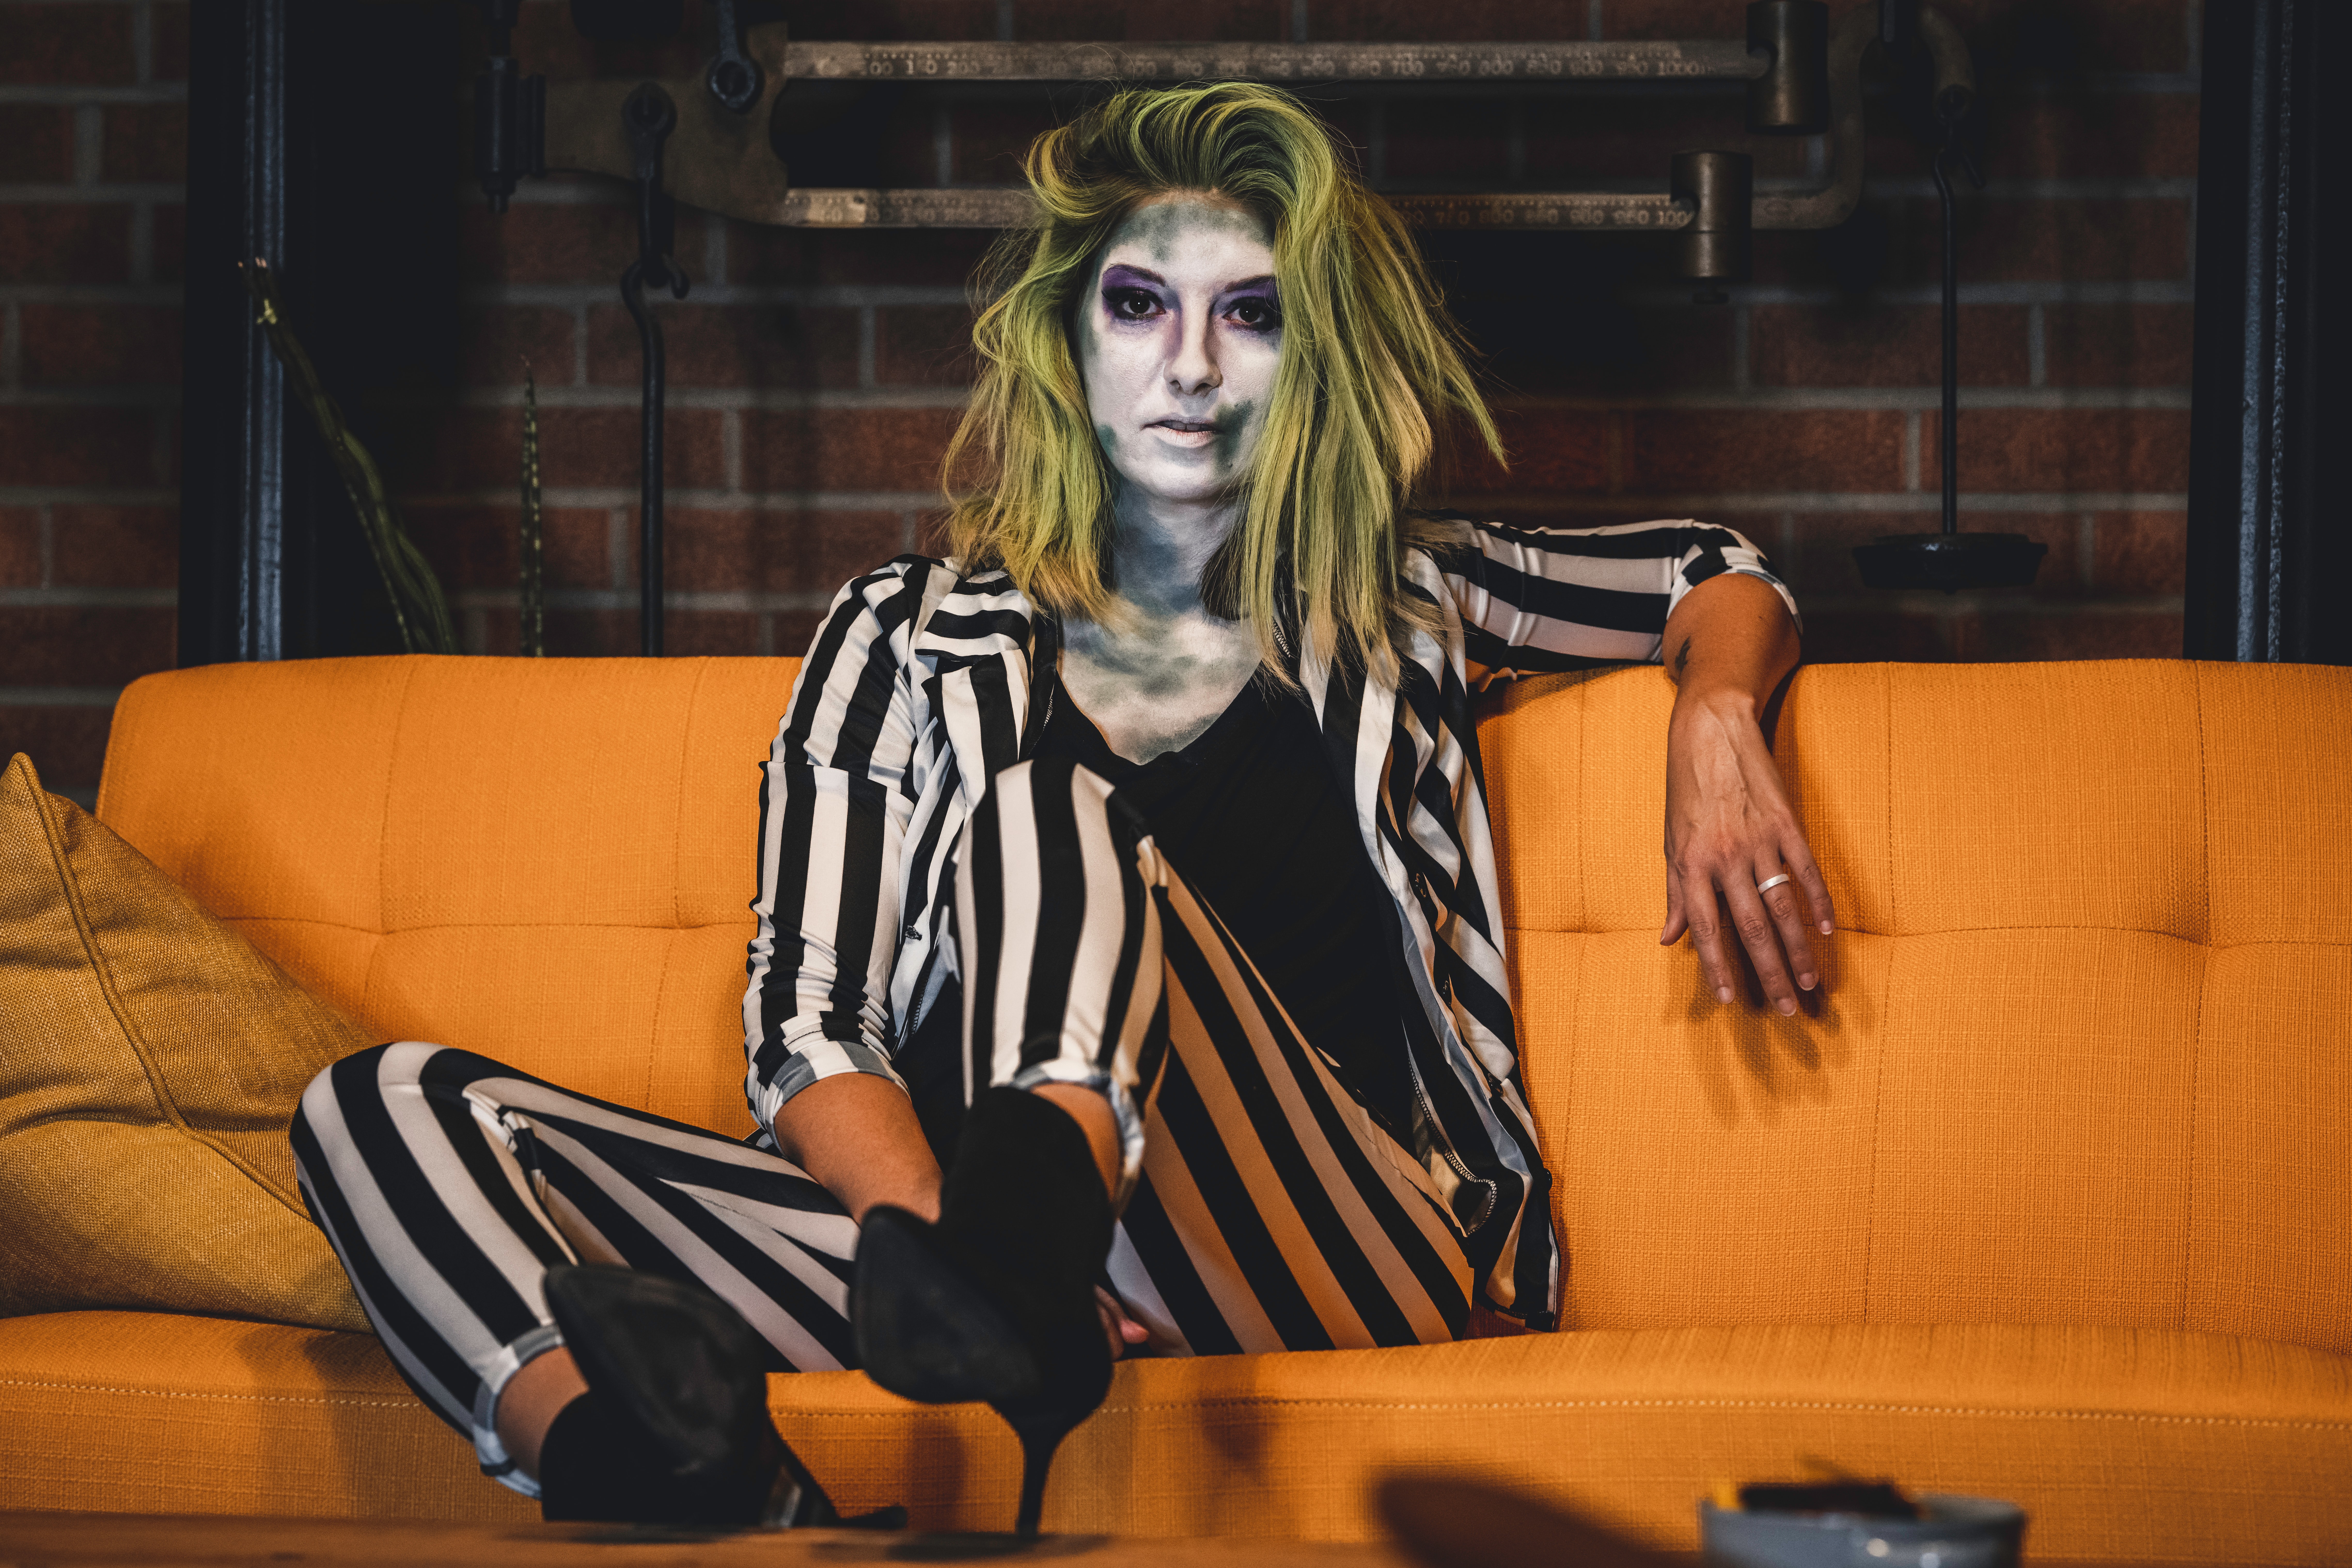 Person dressed in striped suit with halloween style makeup, sitting on orange sofa